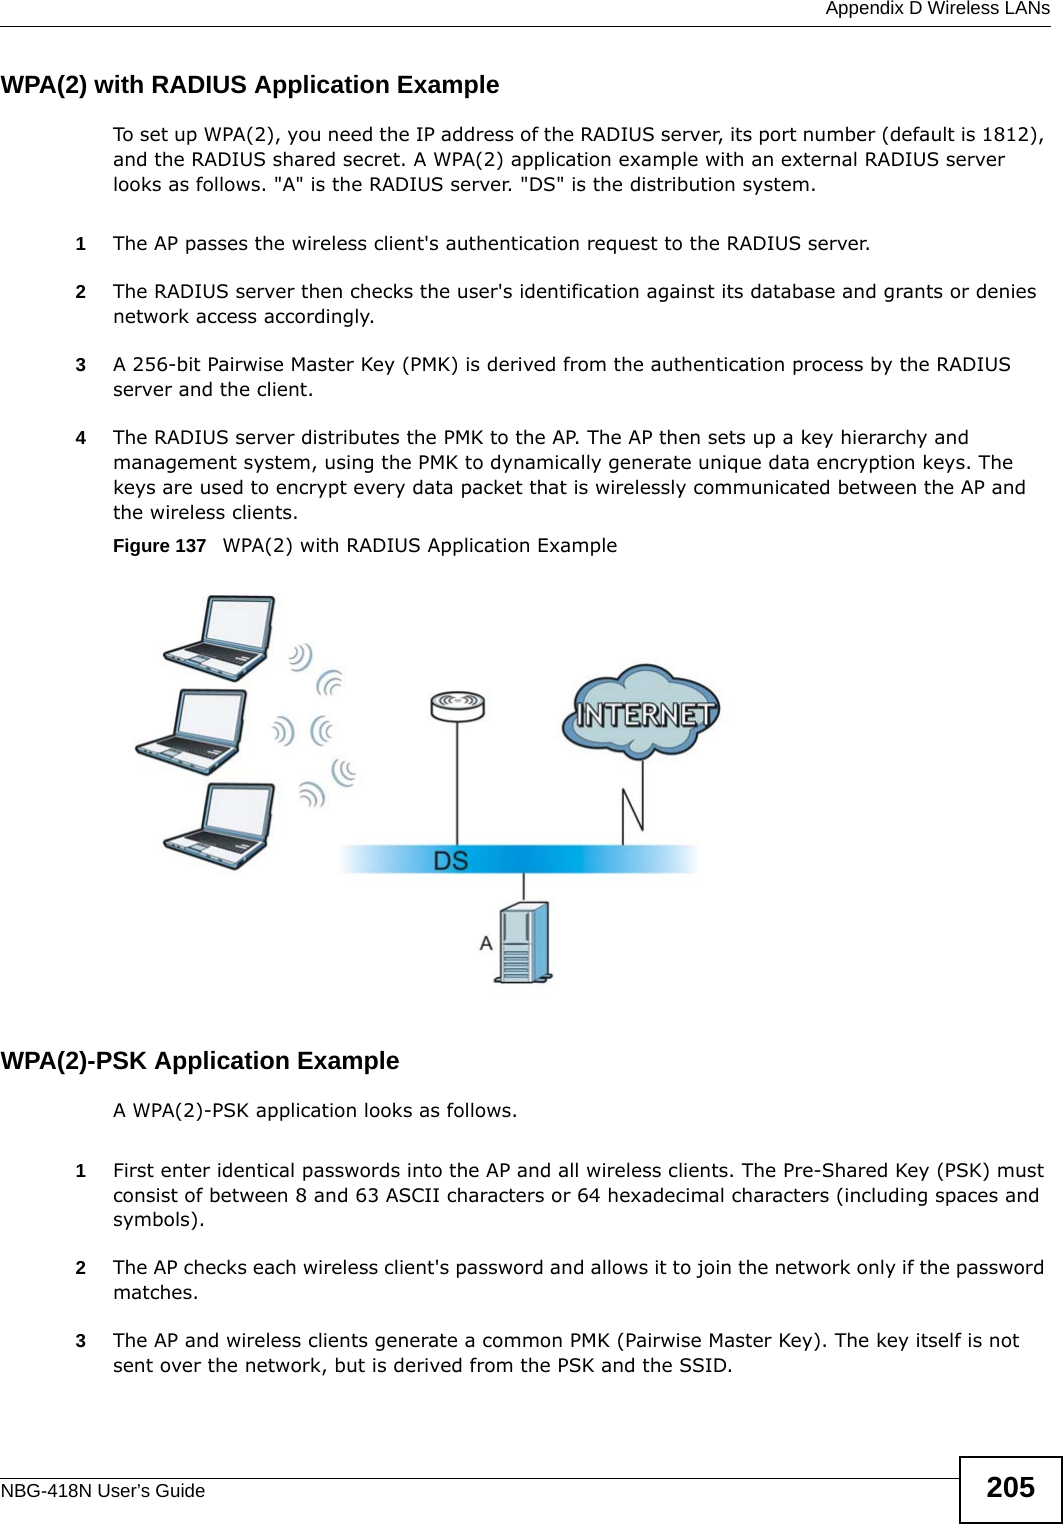  Appendix D Wireless LANsNBG-418N User’s Guide 205WPA(2) with RADIUS Application ExampleTo set up WPA(2), you need the IP address of the RADIUS server, its port number (default is 1812), and the RADIUS shared secret. A WPA(2) application example with an external RADIUS server looks as follows. &quot;A&quot; is the RADIUS server. &quot;DS&quot; is the distribution system.1The AP passes the wireless client&apos;s authentication request to the RADIUS server.2The RADIUS server then checks the user&apos;s identification against its database and grants or denies network access accordingly.3A 256-bit Pairwise Master Key (PMK) is derived from the authentication process by the RADIUS server and the client.4The RADIUS server distributes the PMK to the AP. The AP then sets up a key hierarchy and management system, using the PMK to dynamically generate unique data encryption keys. The keys are used to encrypt every data packet that is wirelessly communicated between the AP and the wireless clients.Figure 137   WPA(2) with RADIUS Application ExampleWPA(2)-PSK Application ExampleA WPA(2)-PSK application looks as follows.1First enter identical passwords into the AP and all wireless clients. The Pre-Shared Key (PSK) must consist of between 8 and 63 ASCII characters or 64 hexadecimal characters (including spaces and symbols).2The AP checks each wireless client&apos;s password and allows it to join the network only if the password matches.3The AP and wireless clients generate a common PMK (Pairwise Master Key). The key itself is not sent over the network, but is derived from the PSK and the SSID. 